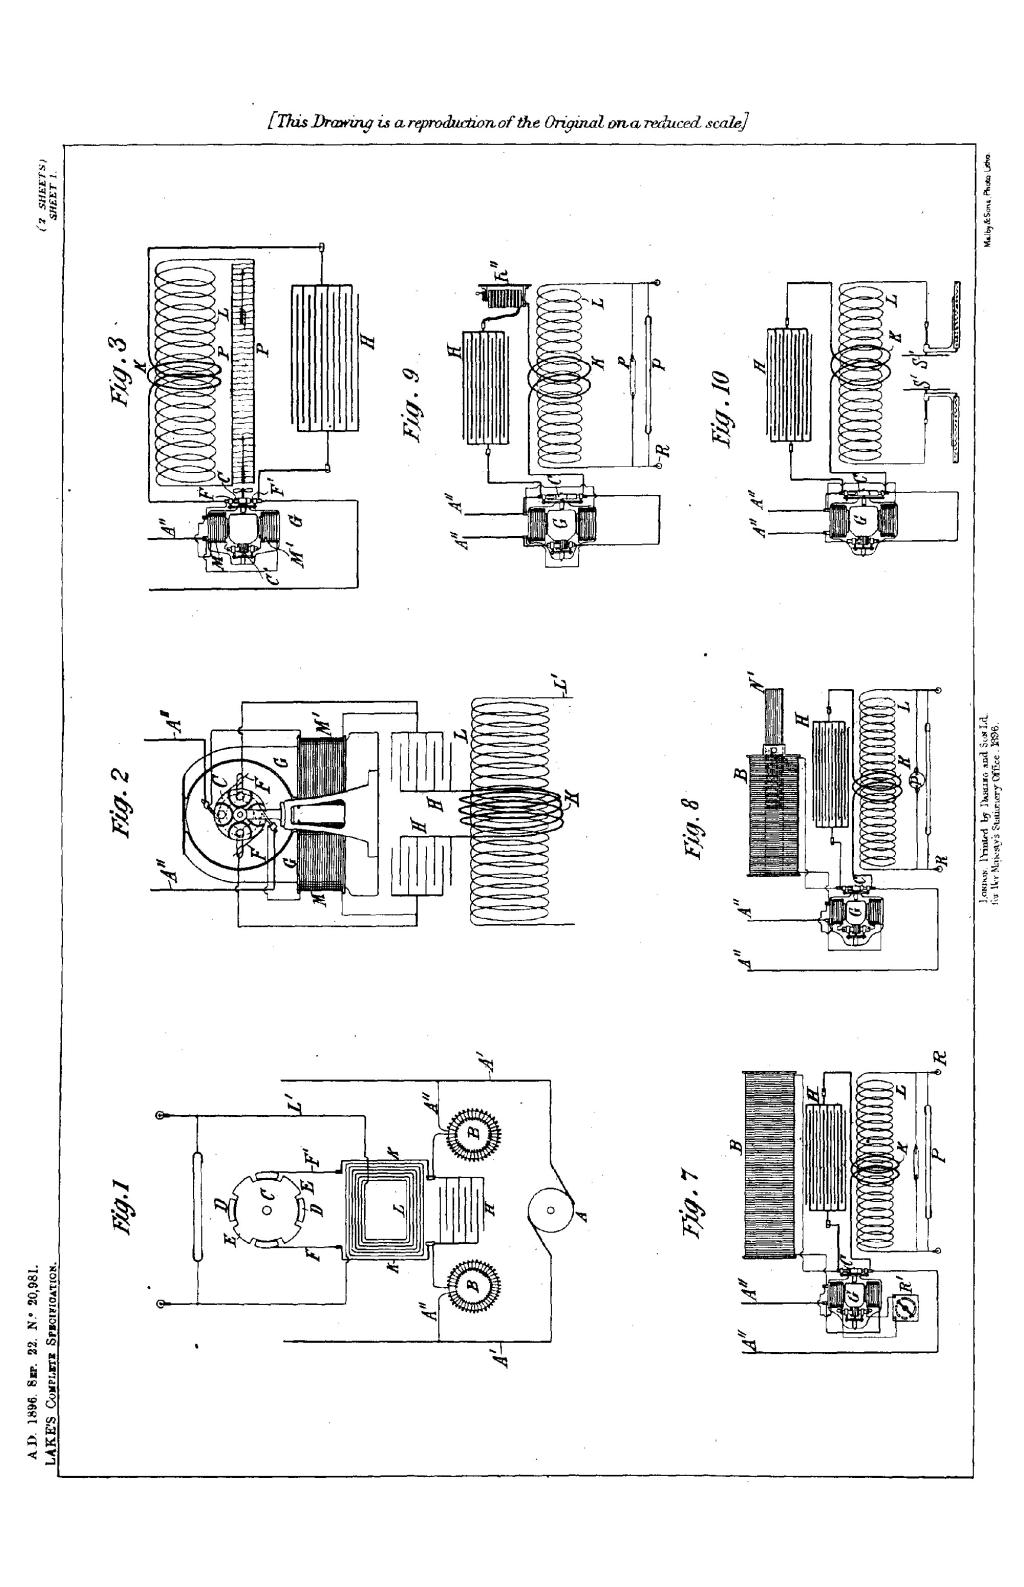 Nikola Tesla British Patent 20,981 - Improvements Relating to the Production, Regulation, and Utilization of Electric Currents of High Frequency, and to Apparatus Therefor - Image 1